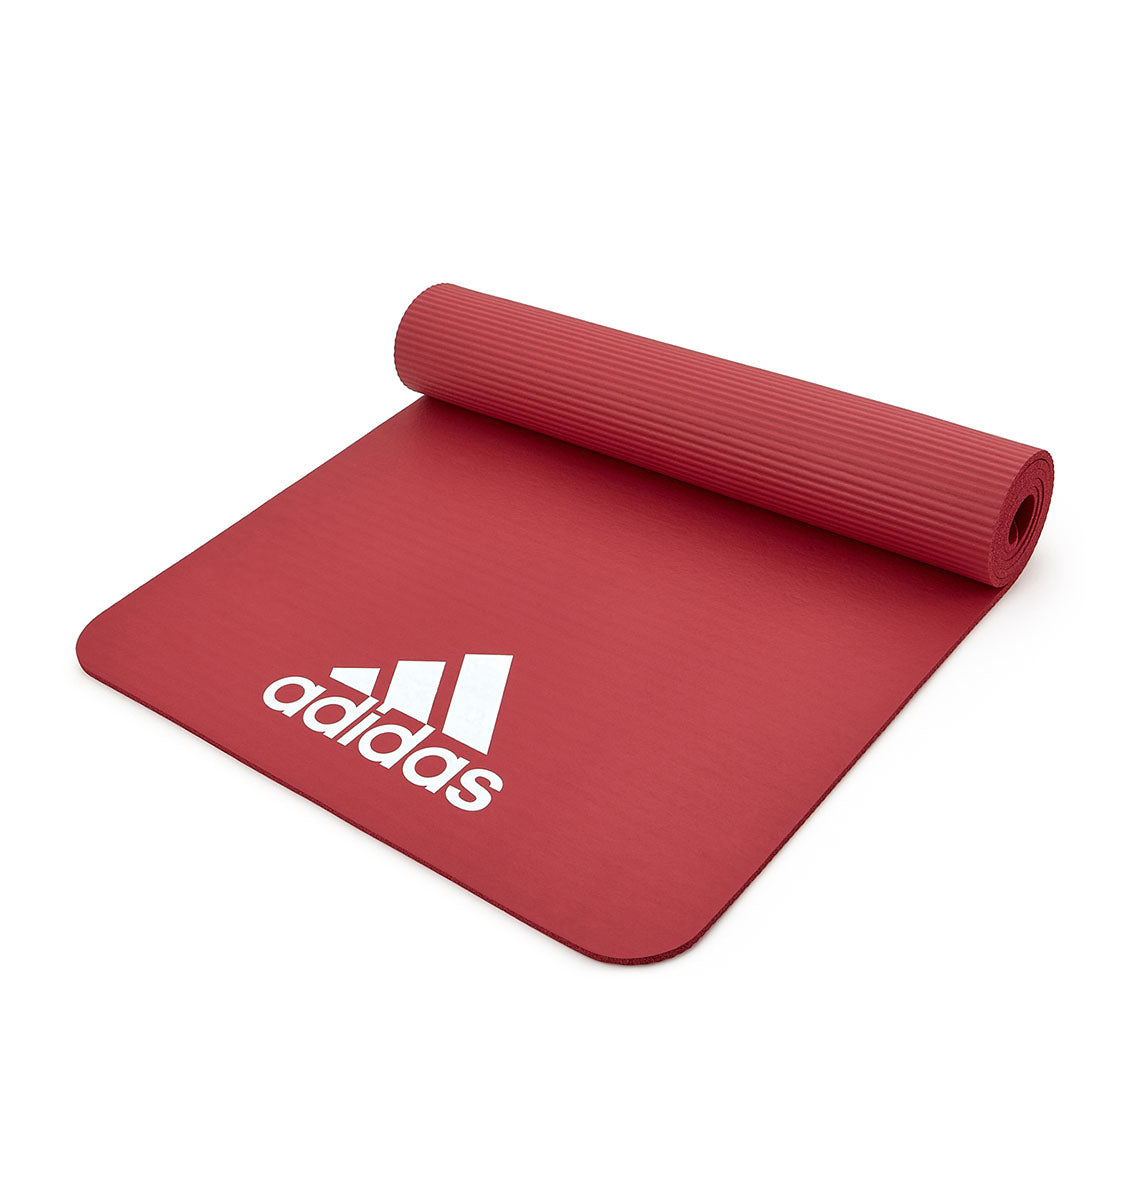 adidas Fitness Mat - 7mm - Red - 1